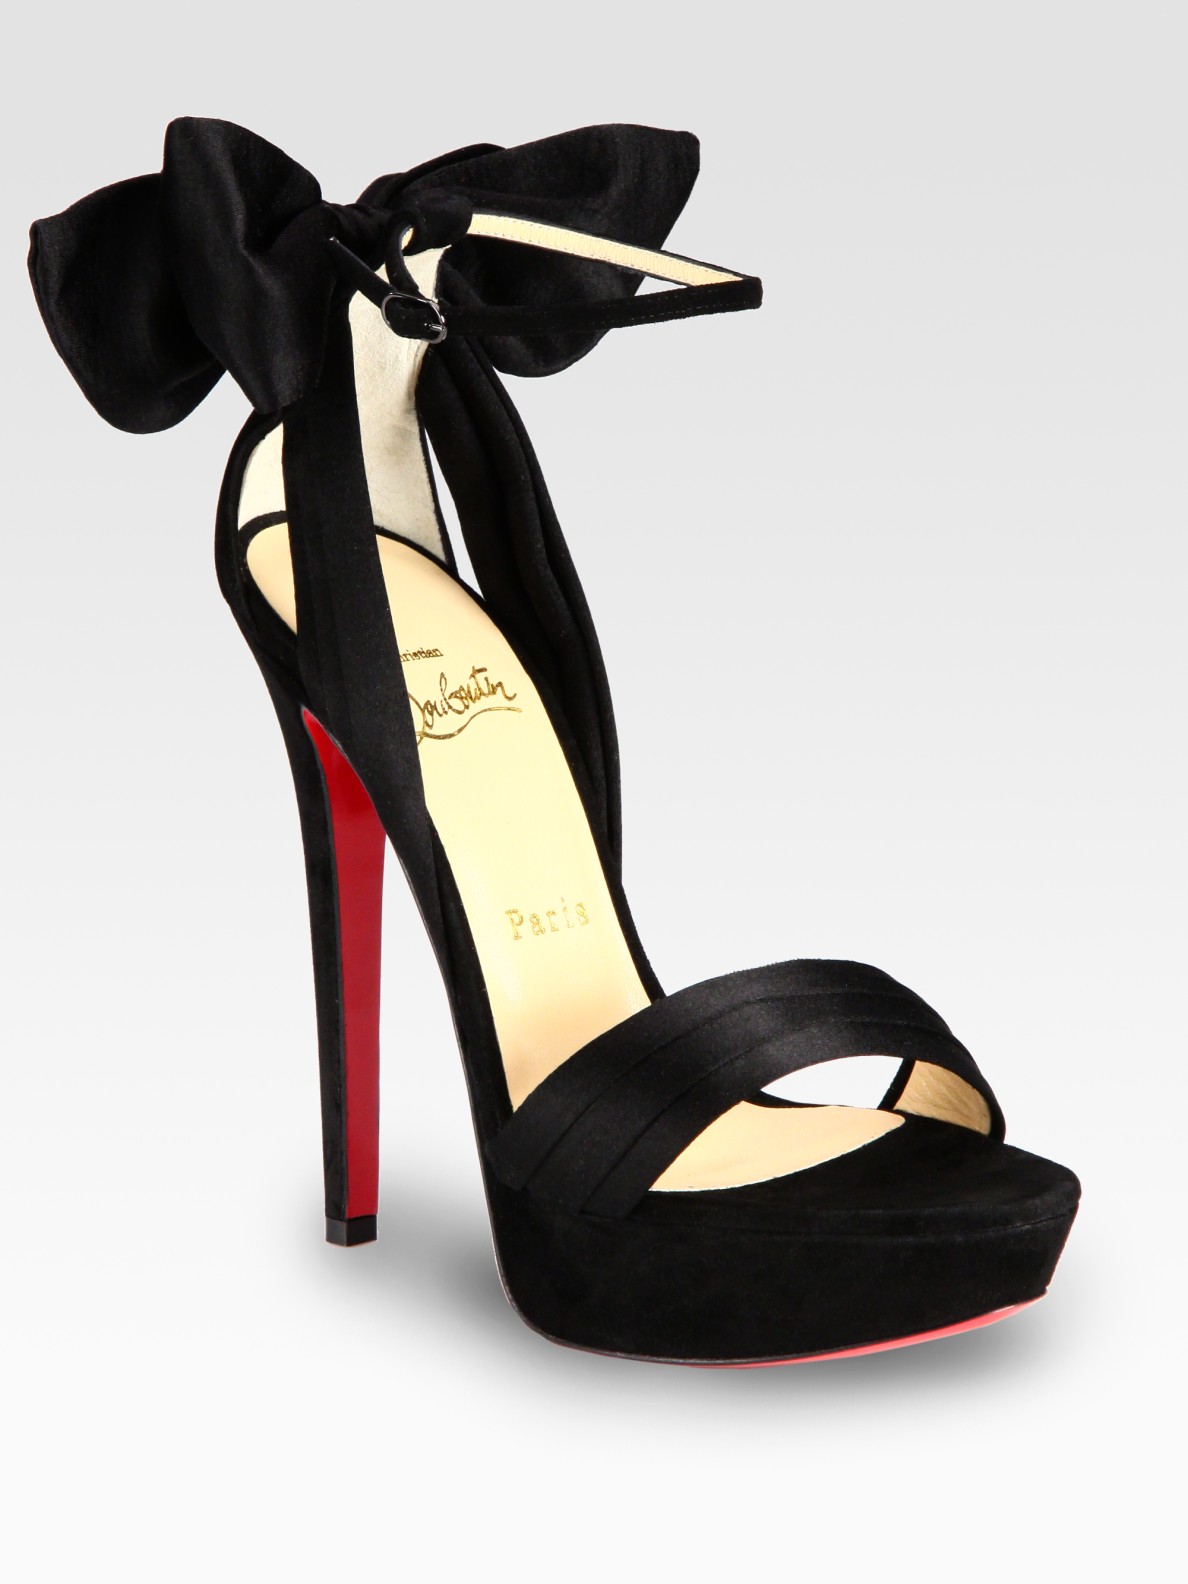 Christian Louboutin and Bow Platform Sandals in Black | Lyst